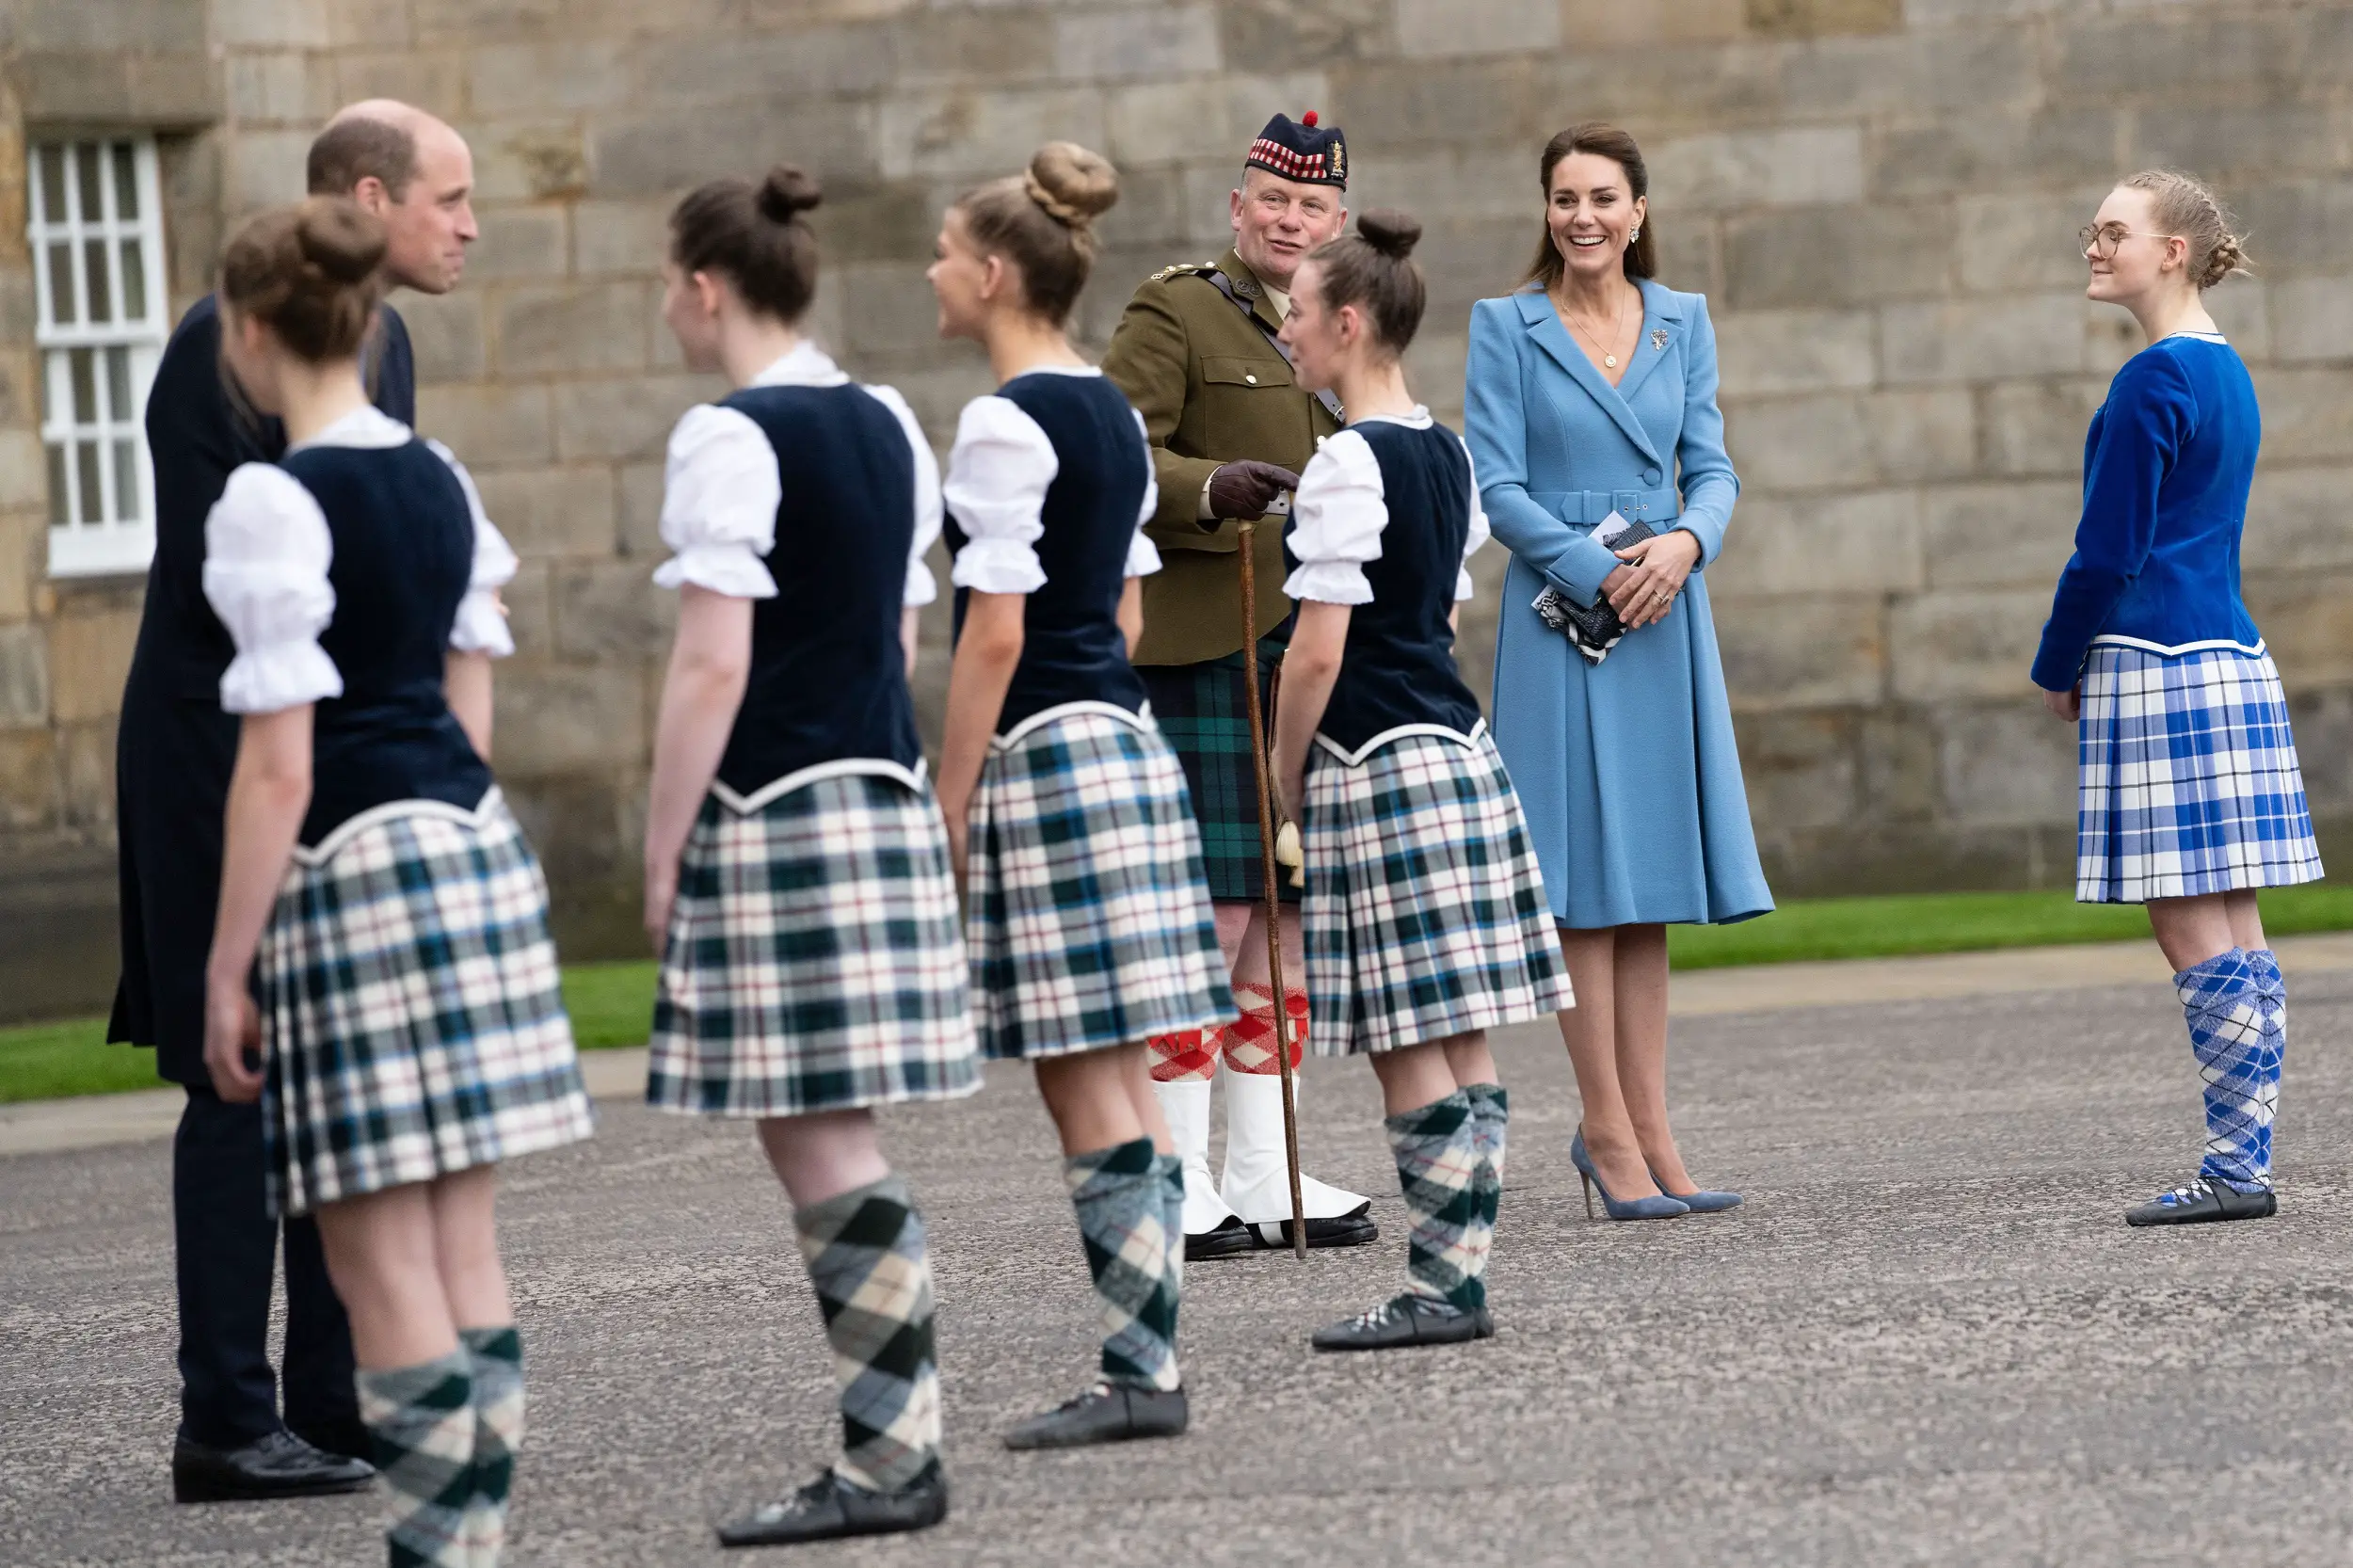 The Duchess of Cambridge attended a Beating the Retreat Ceremony at the Palace of Holyroodhouse in Scotland